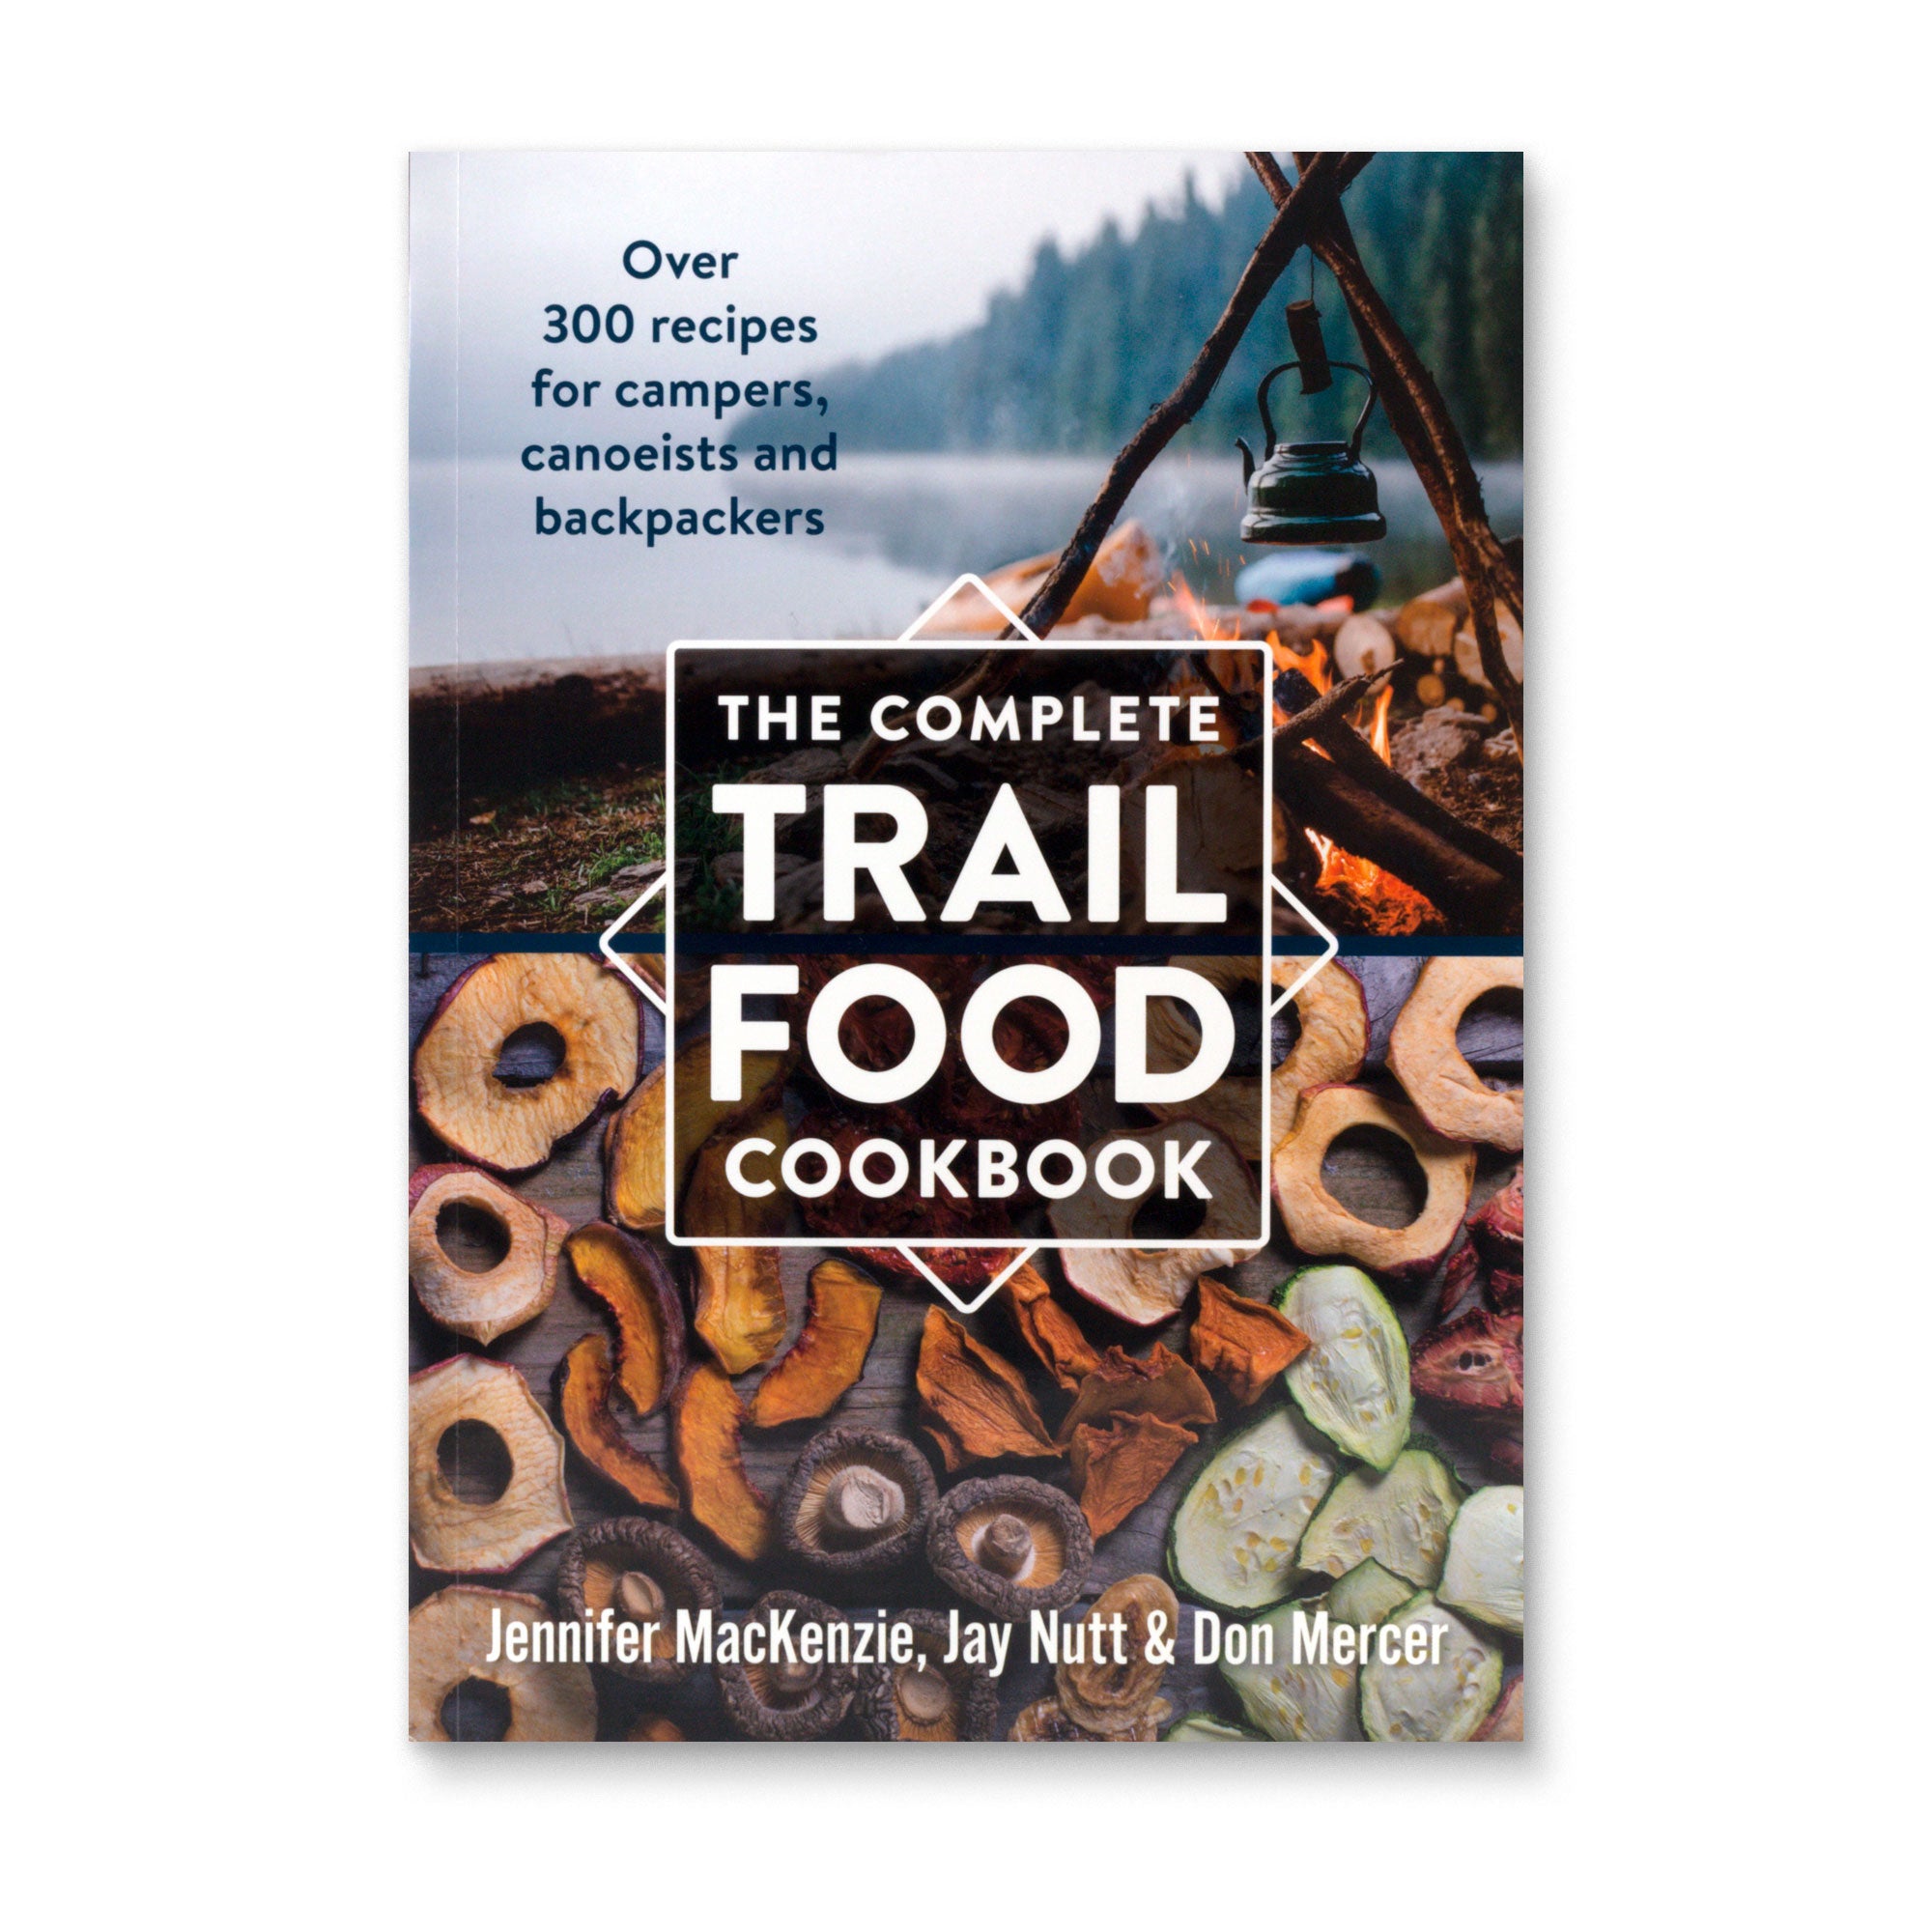 The Complete Trail Food Cookbook